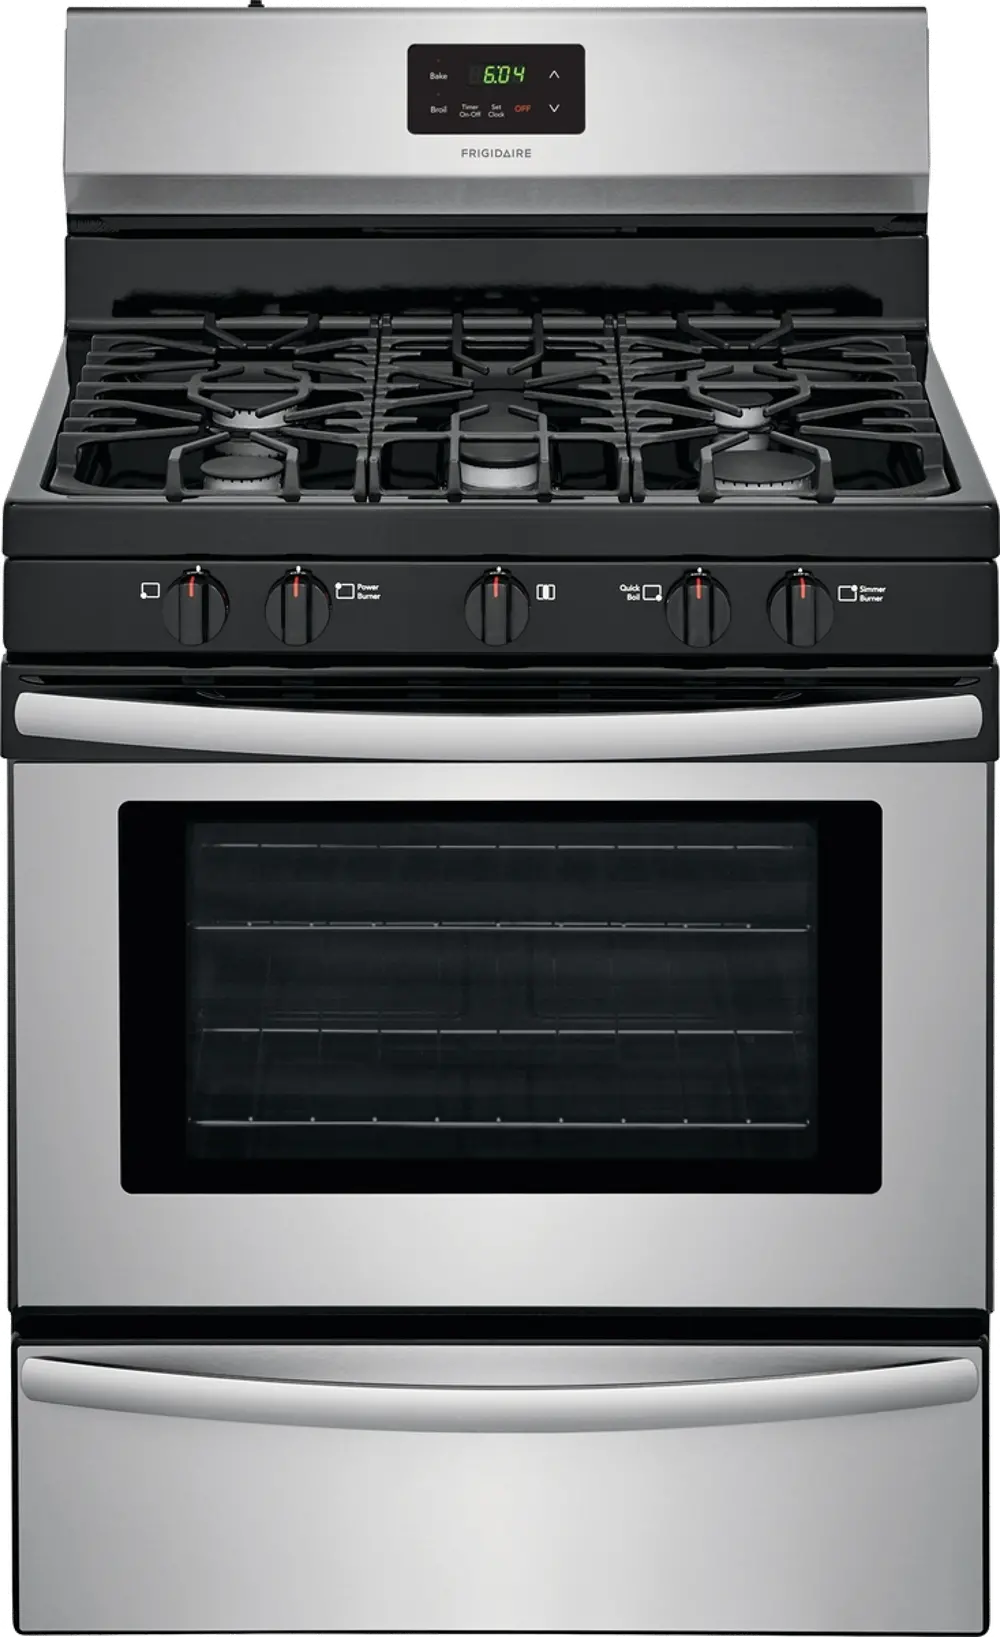 FFGF3052TS Frigidaire Gas Range - 4.2 cu. ft. Stainless Steel-1